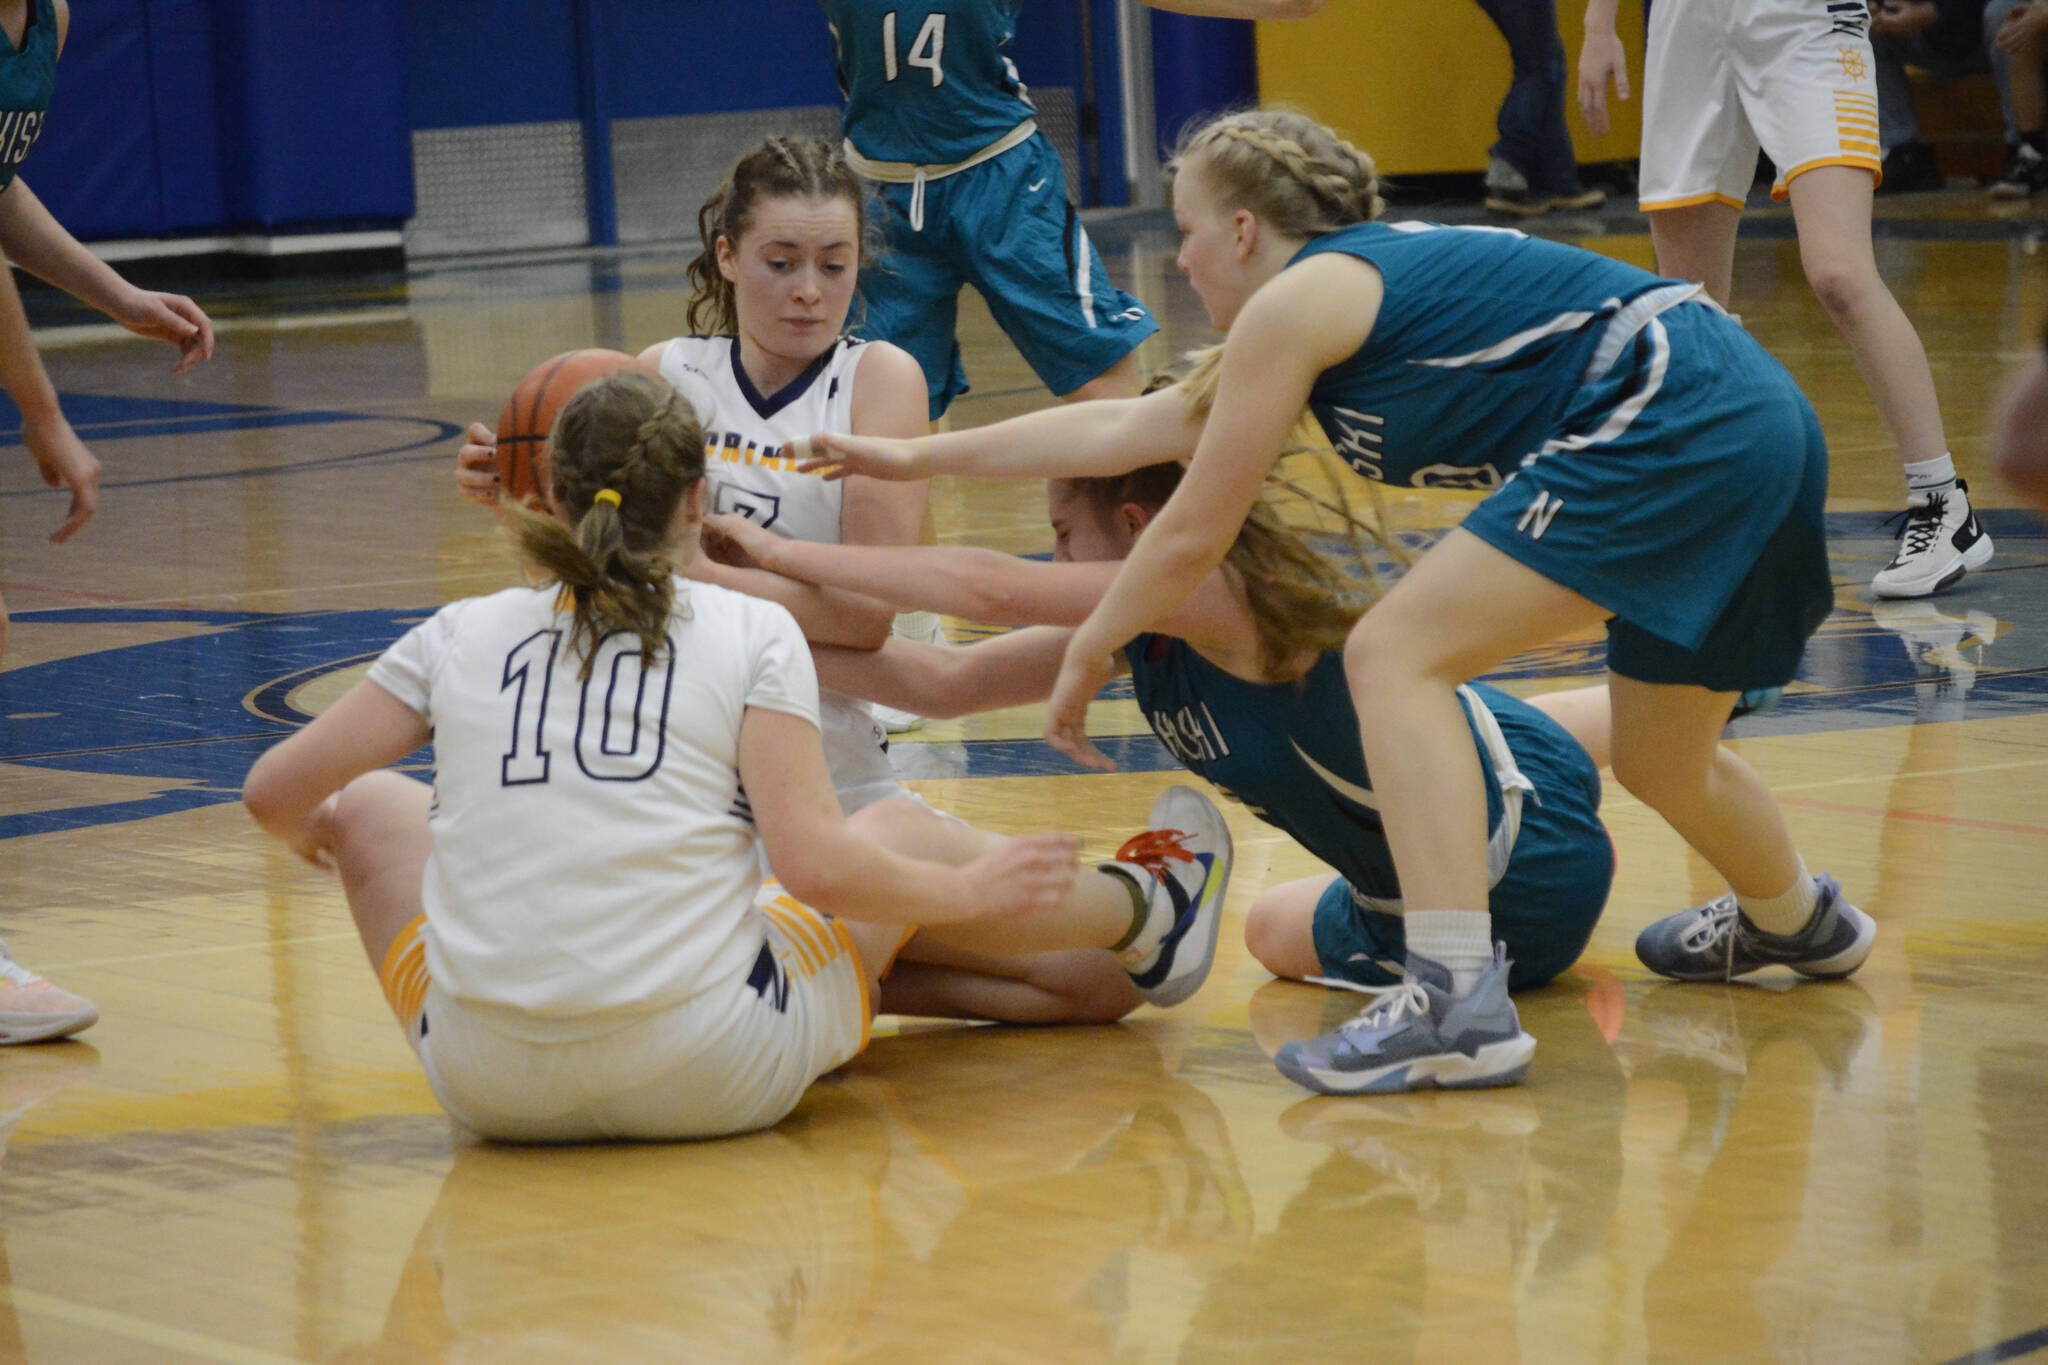 Lady Mariner Kaylin Anderson keeps the ball away from the Lady Bulldogs during Senior Night on Friday, Feb. 25, 2022, at the Alice Witte Gym at Homer High School in Homer, Alaska. (Photo by Michael Armstrong/Homer News)